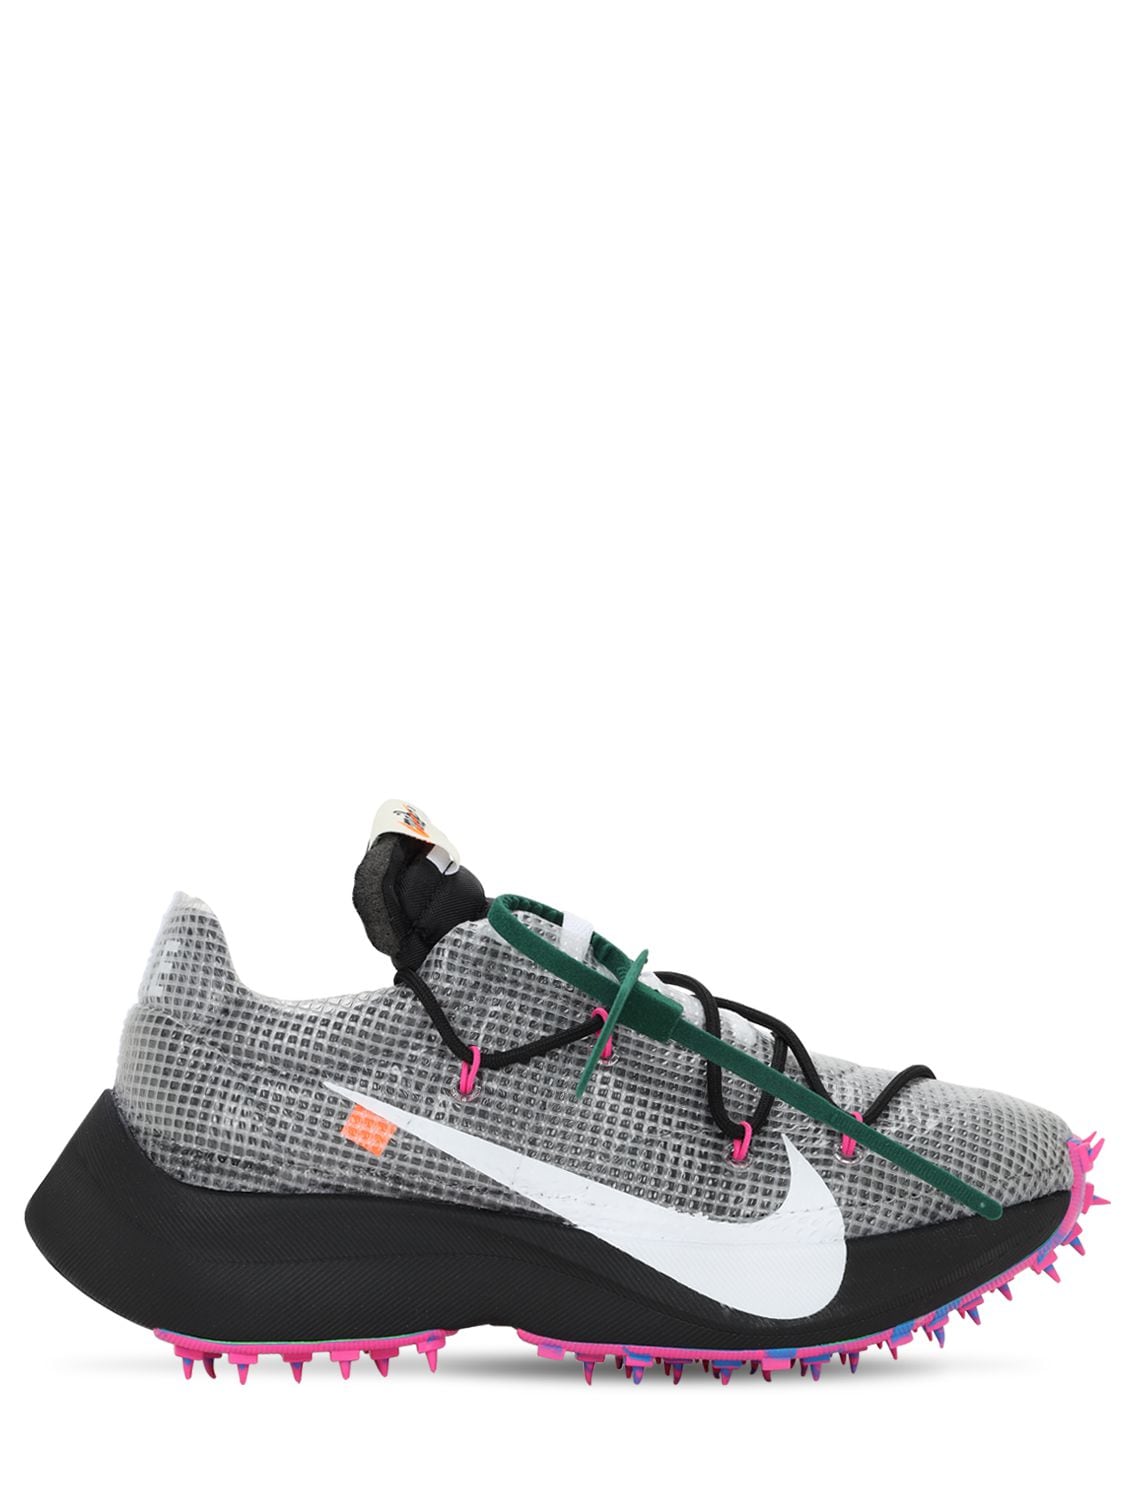 off white sneakers womens nike